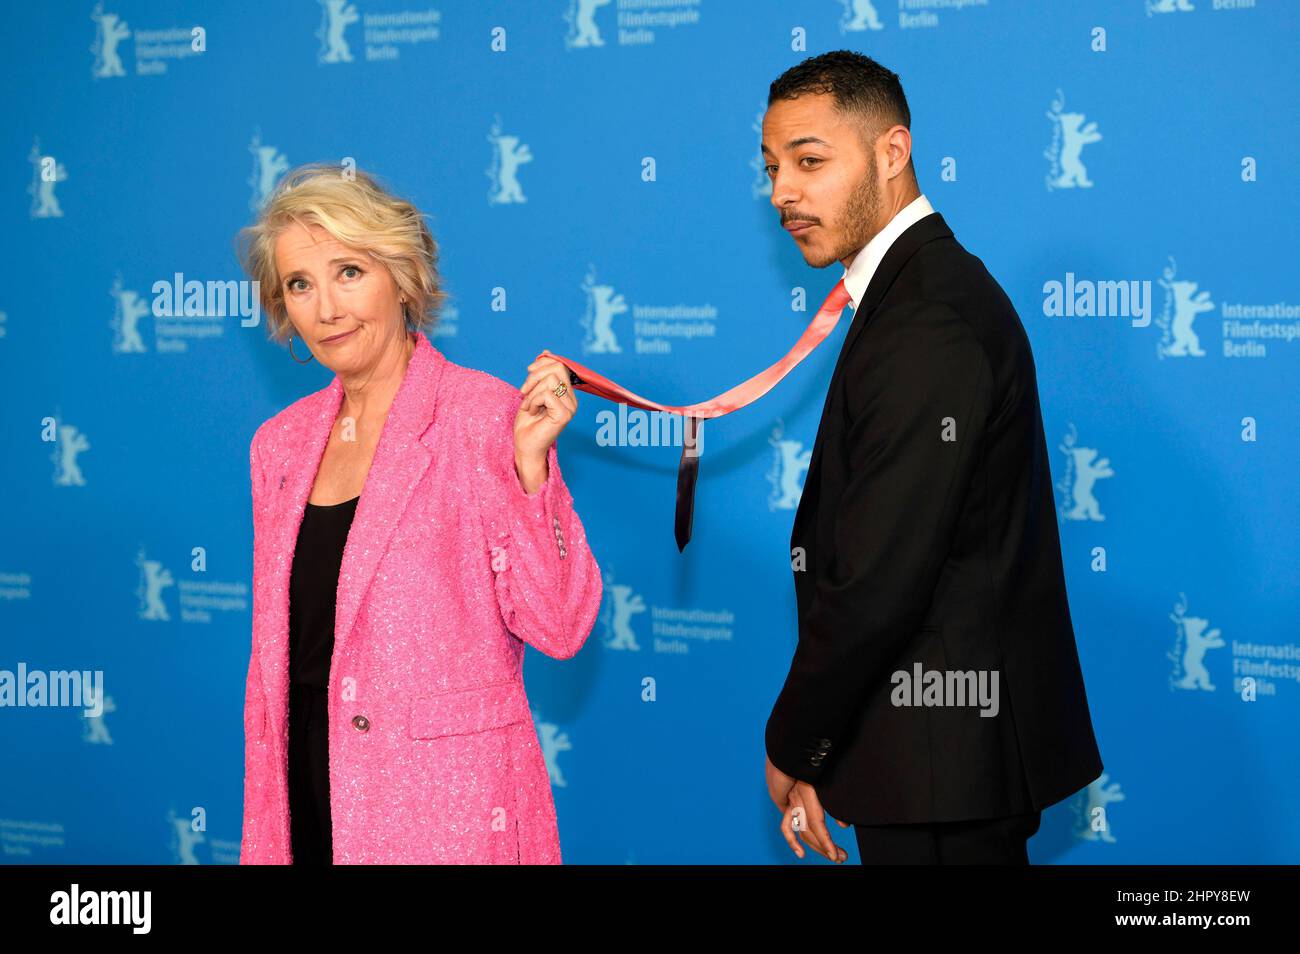 Emma Thompson and Daryl McCormack at the 'Good Luck to You, Leo Grande' photocall during the 72nd Berlinale International Film Festival Berlin at Grand Hyatt Hotel on February 12, 2022 in Berlin, Germany. Stock Photo